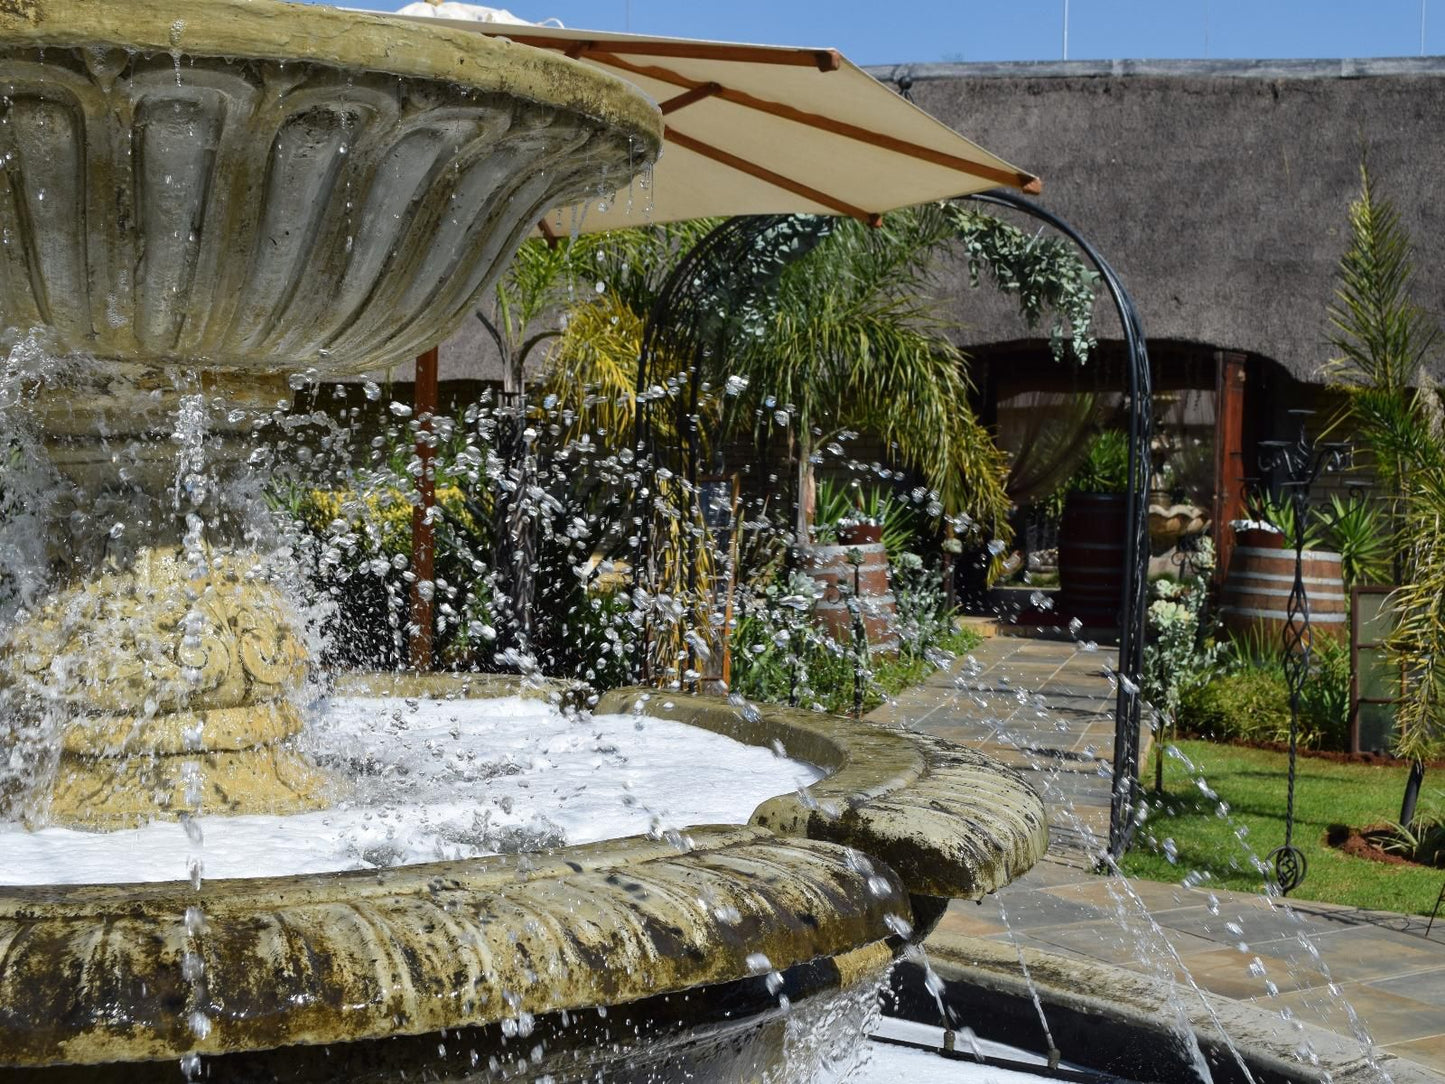 Accommodation At Thabong Venue Brakpan Johannesburg Gauteng South Africa Fountain, Architecture, Plant, Nature, Garden, Swimming Pool